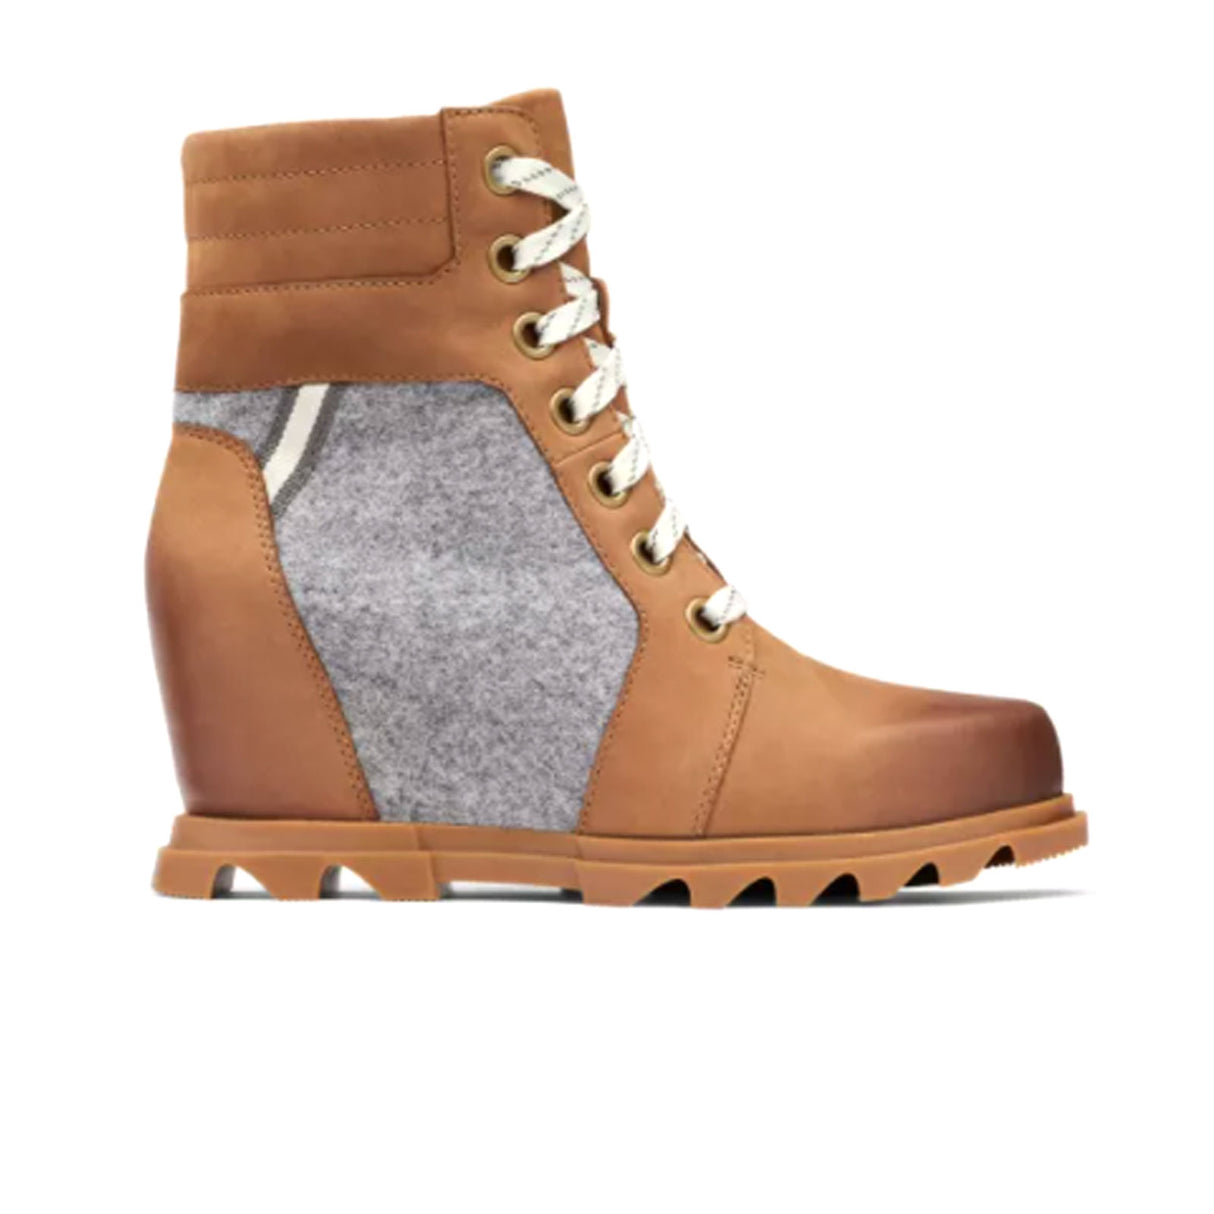 Sorel Joan of Arctic Wedge III Lexie (Women) - Taffy/Gum Boots - Fashion - Ankle Boot - The Heel Shoe Fitters